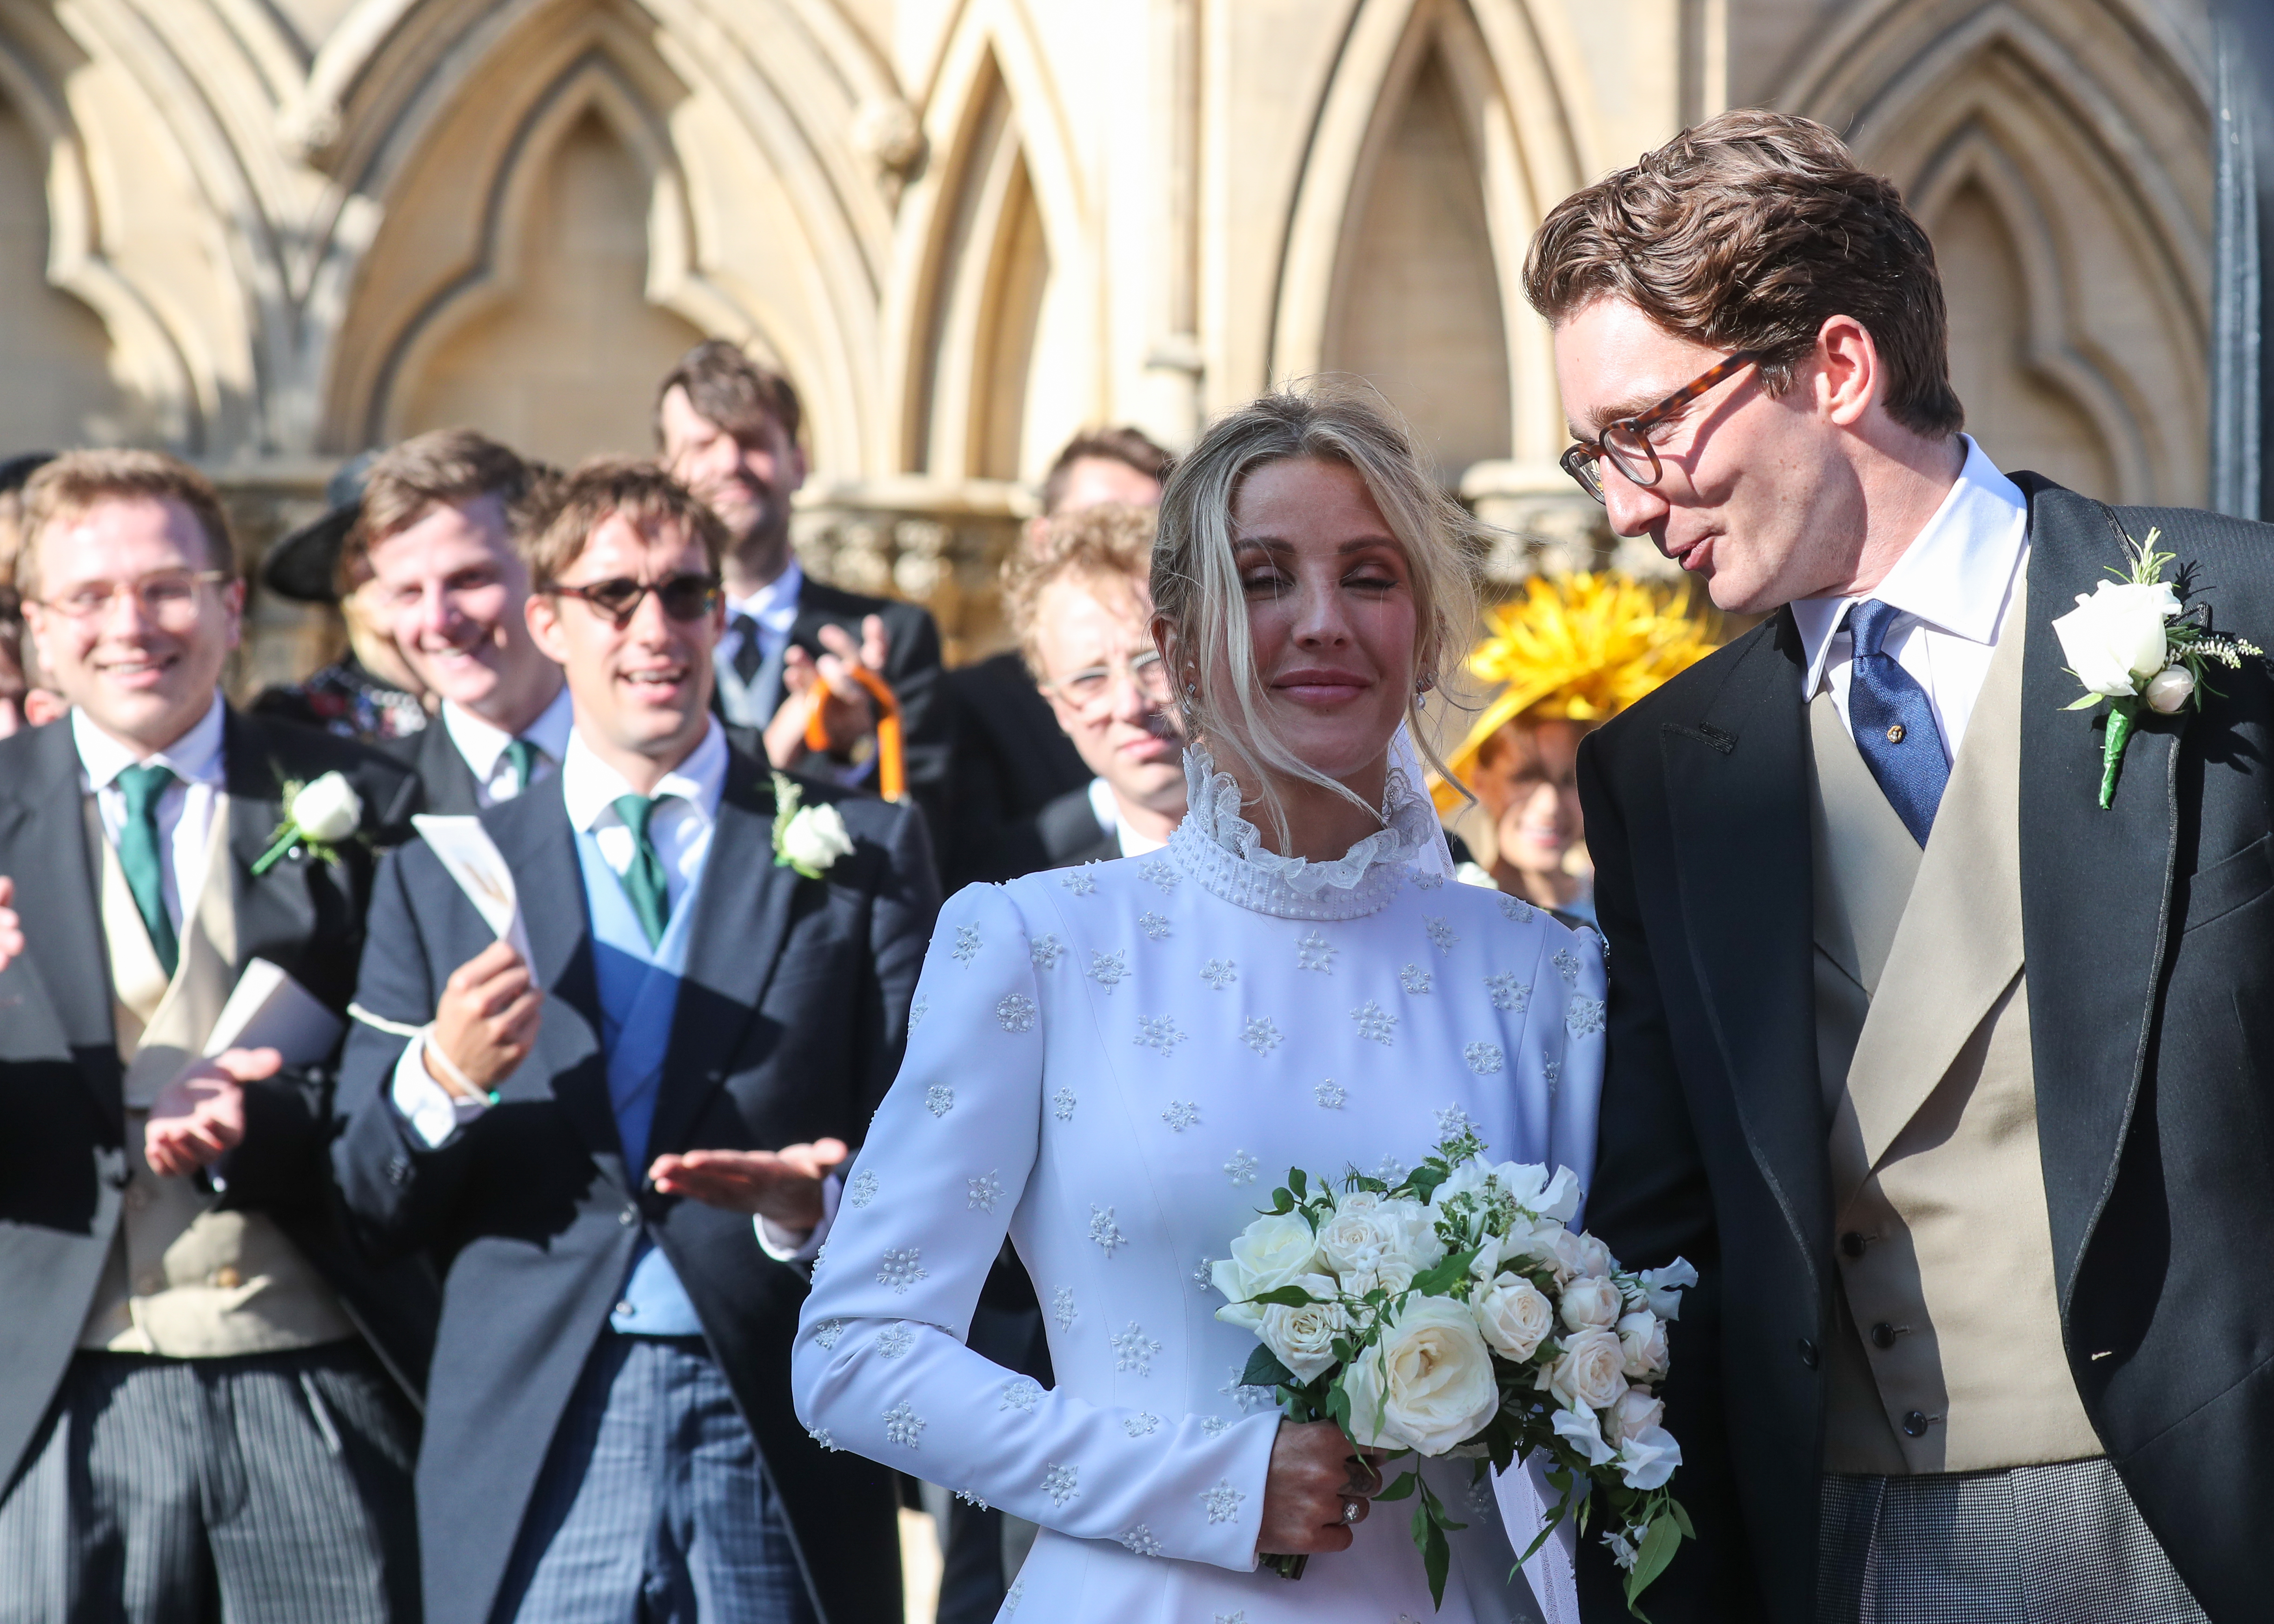 The pair married in 2019